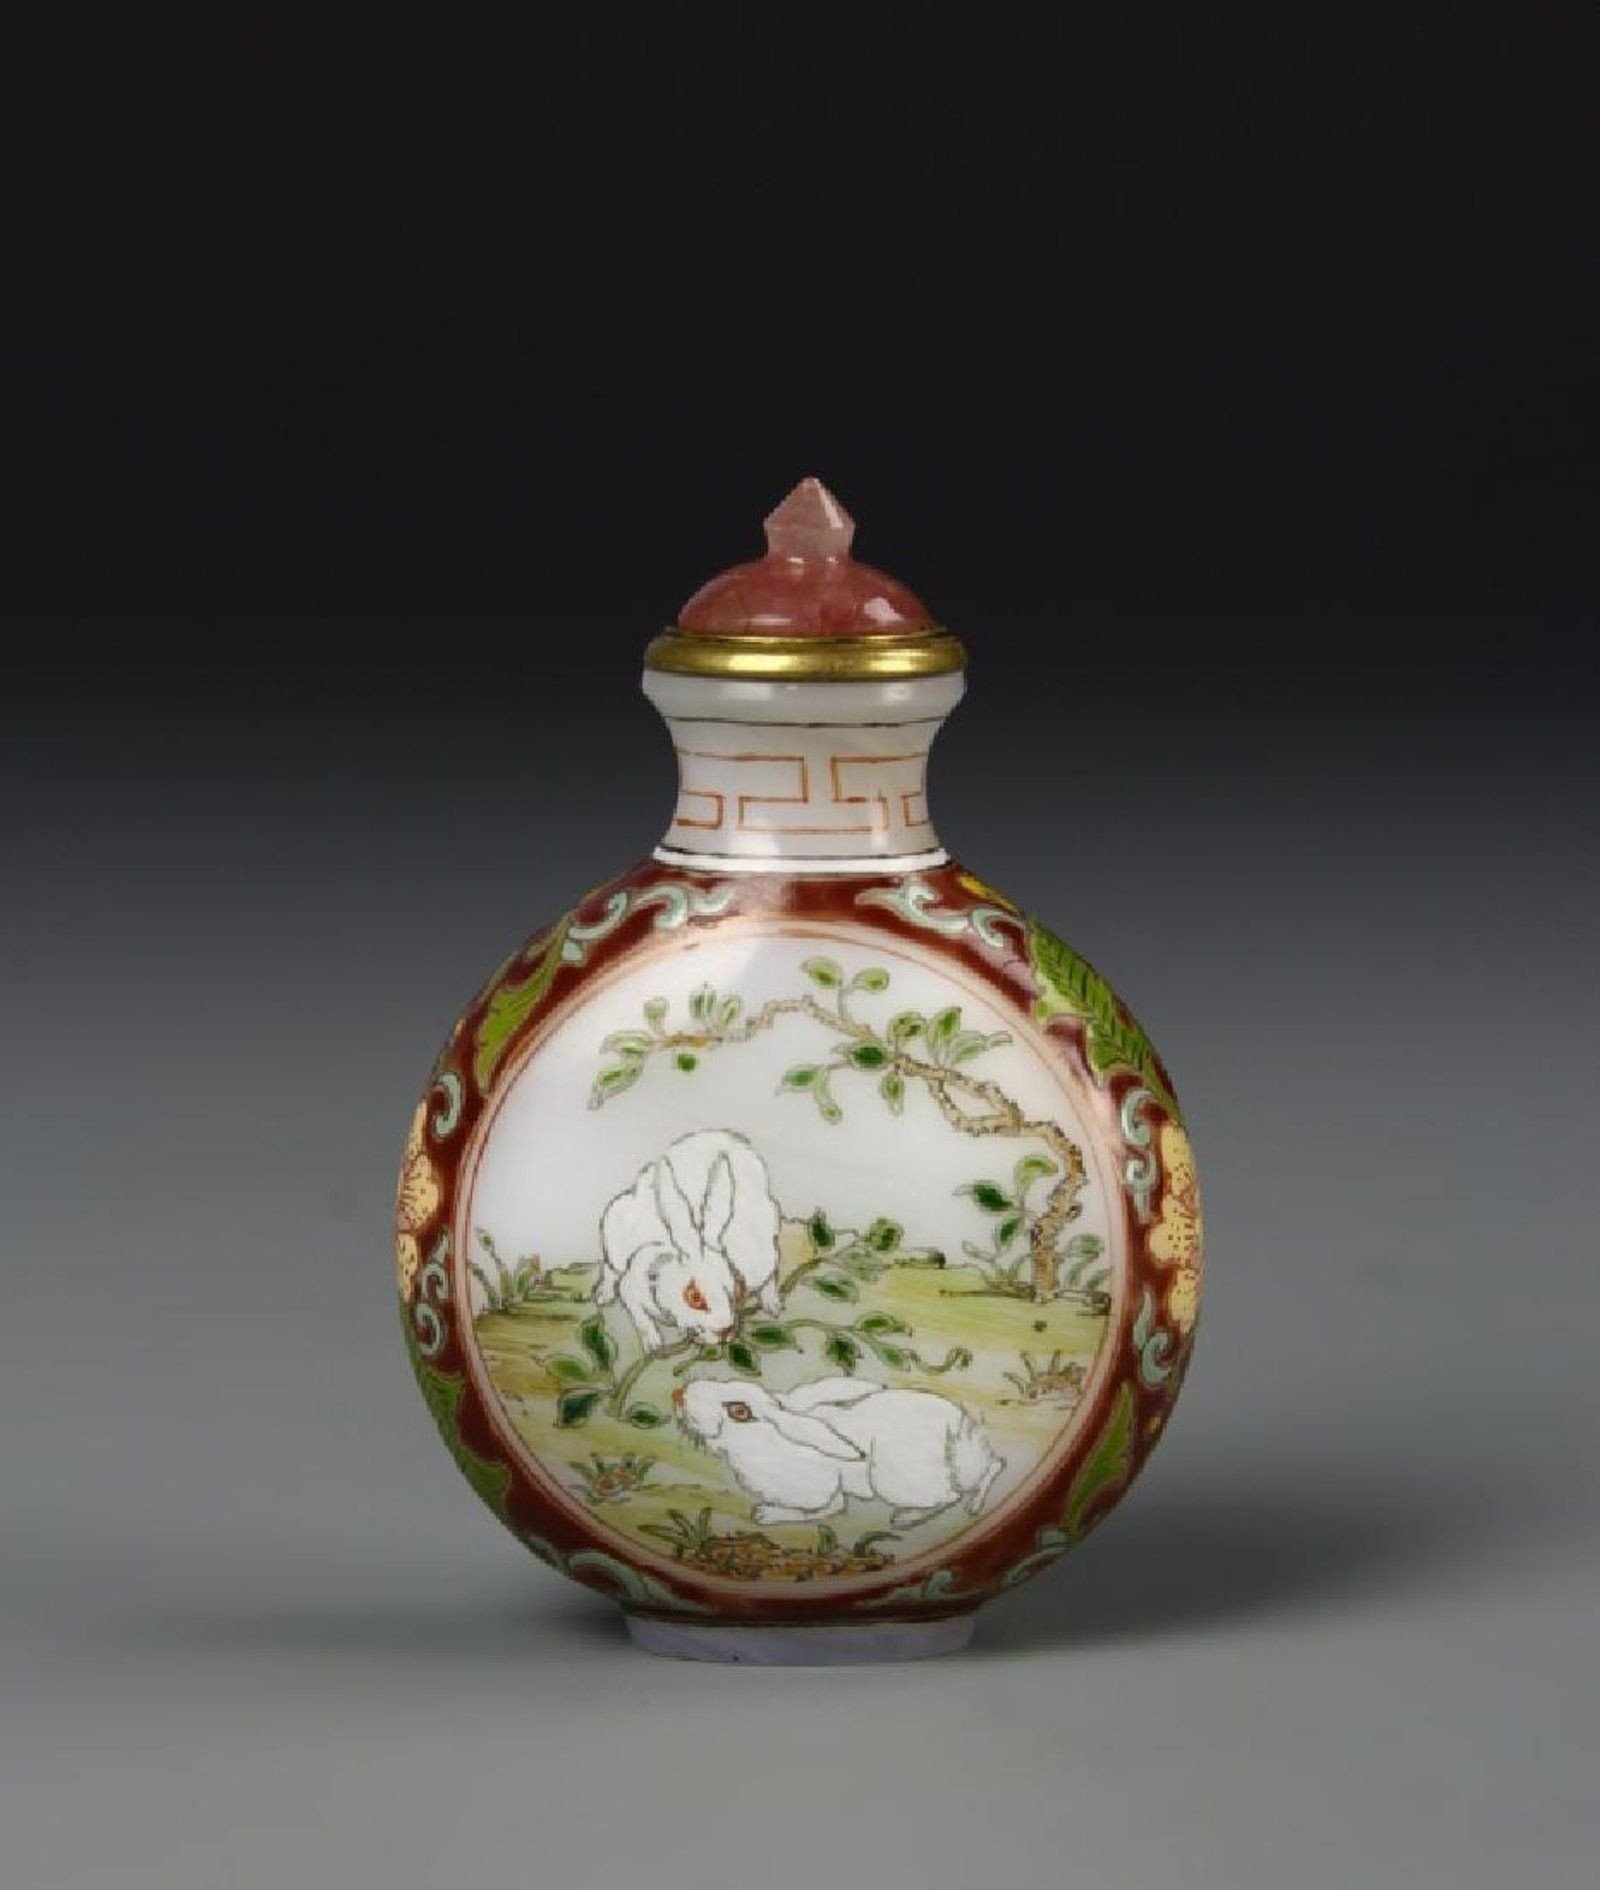 21 Cute Antique Vases for Sale 2024 free download antique vases for sale of 10 new what to put in a large glass vase bogekompresorturkiye com throughout what to put in a large glass vase best of chinese peking glass snuff bottle lahvicky od